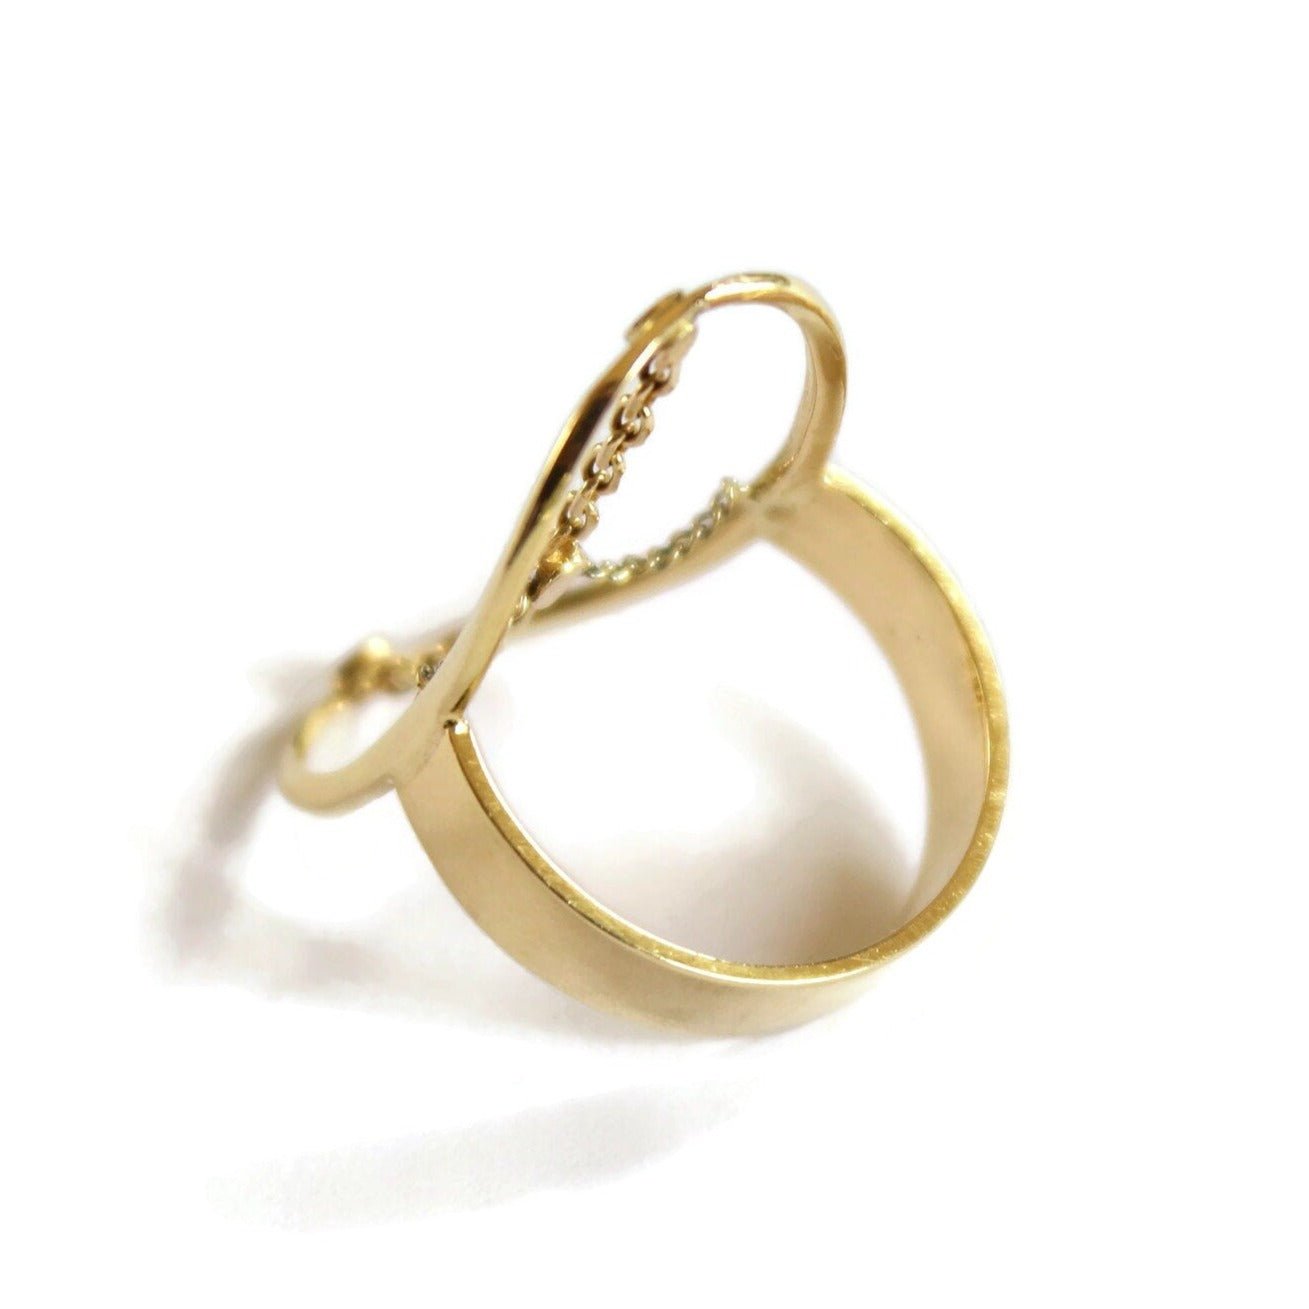 Handmade 18k Gold Oval Cocktail Ring - R. Mouzannar Jewelry